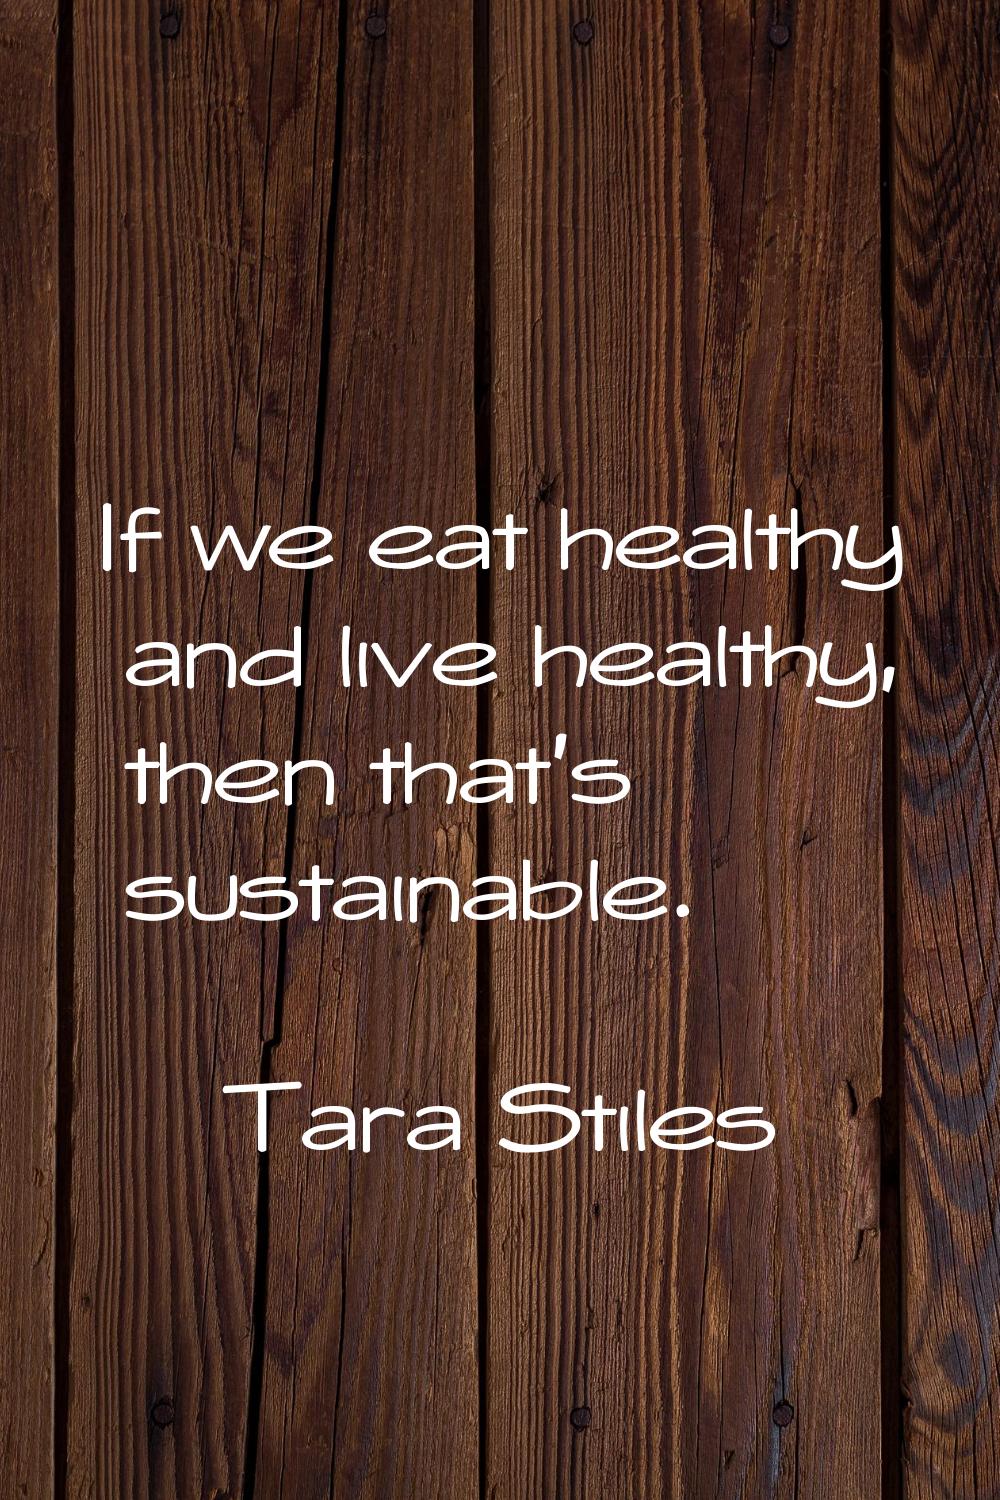 If we eat healthy and live healthy, then that's sustainable.